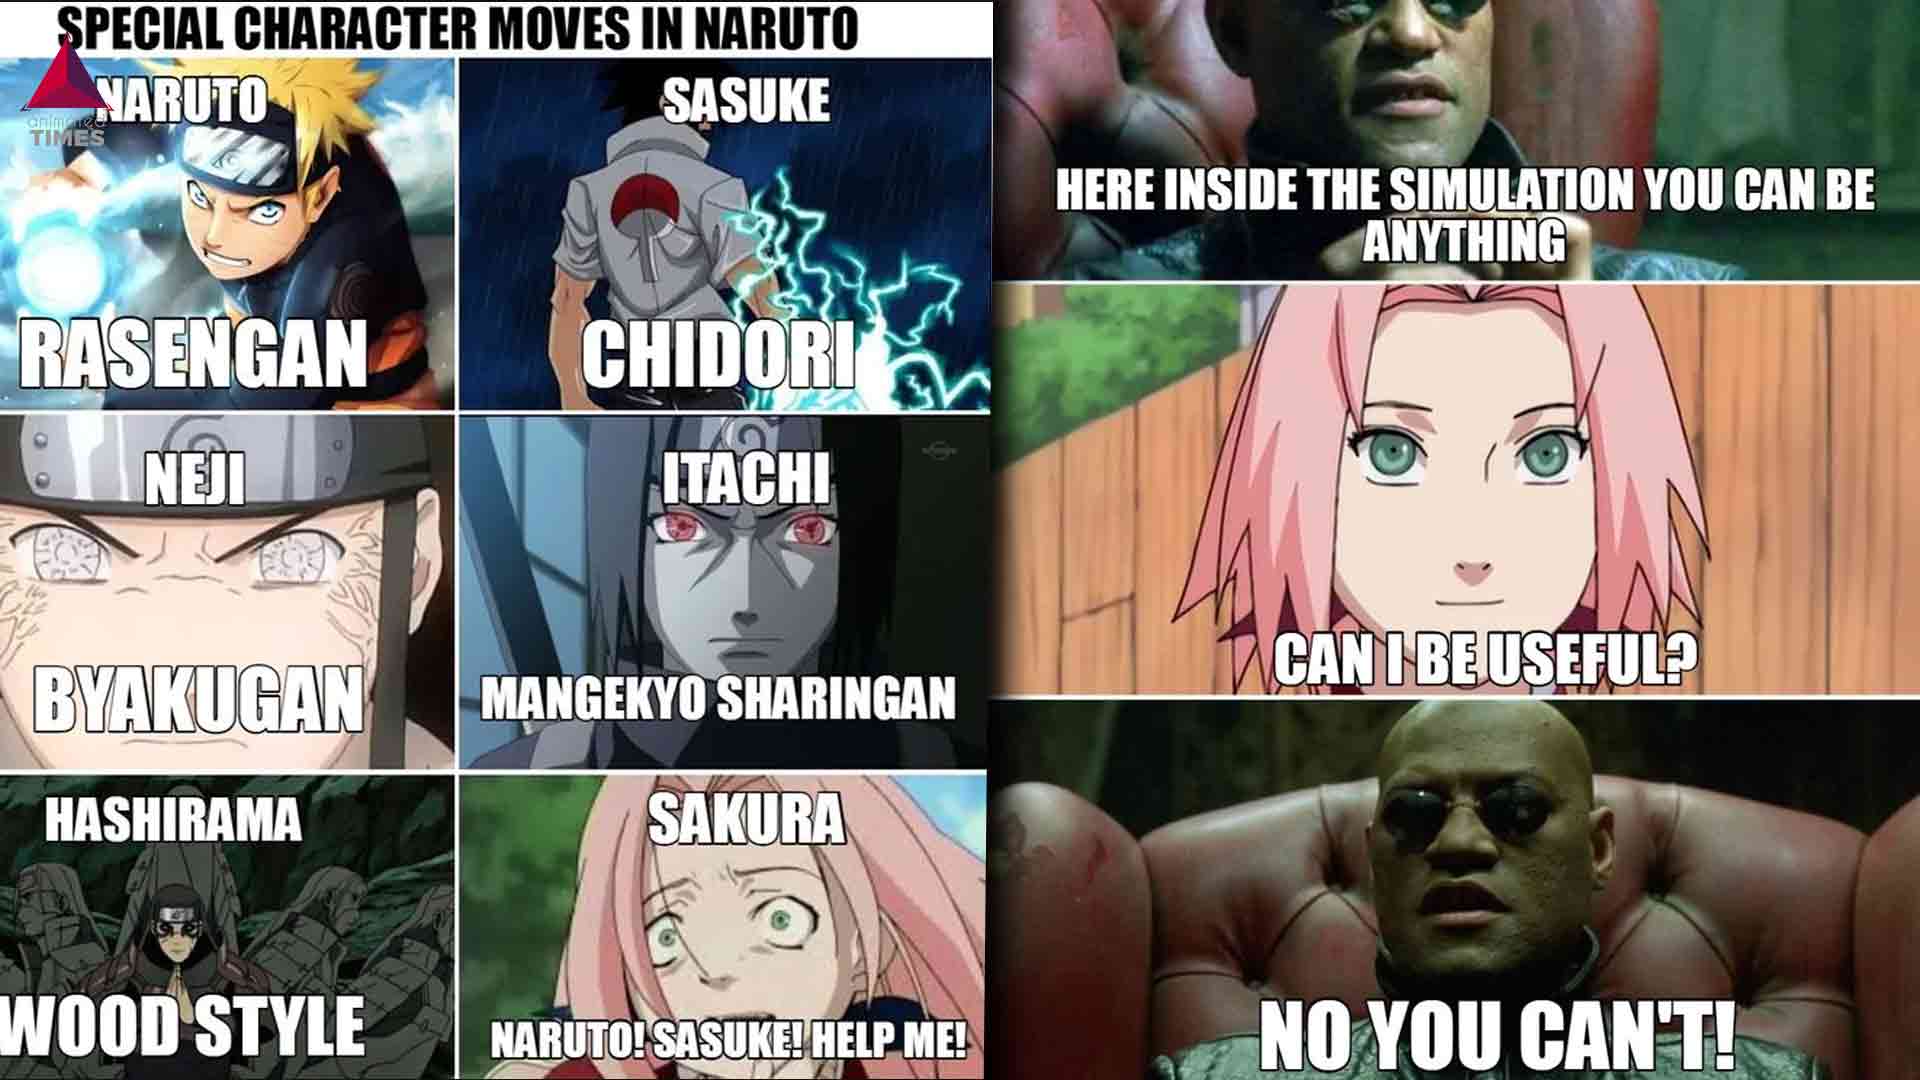 Hysterical Sakura memes that will be appreciated by Naruto fans